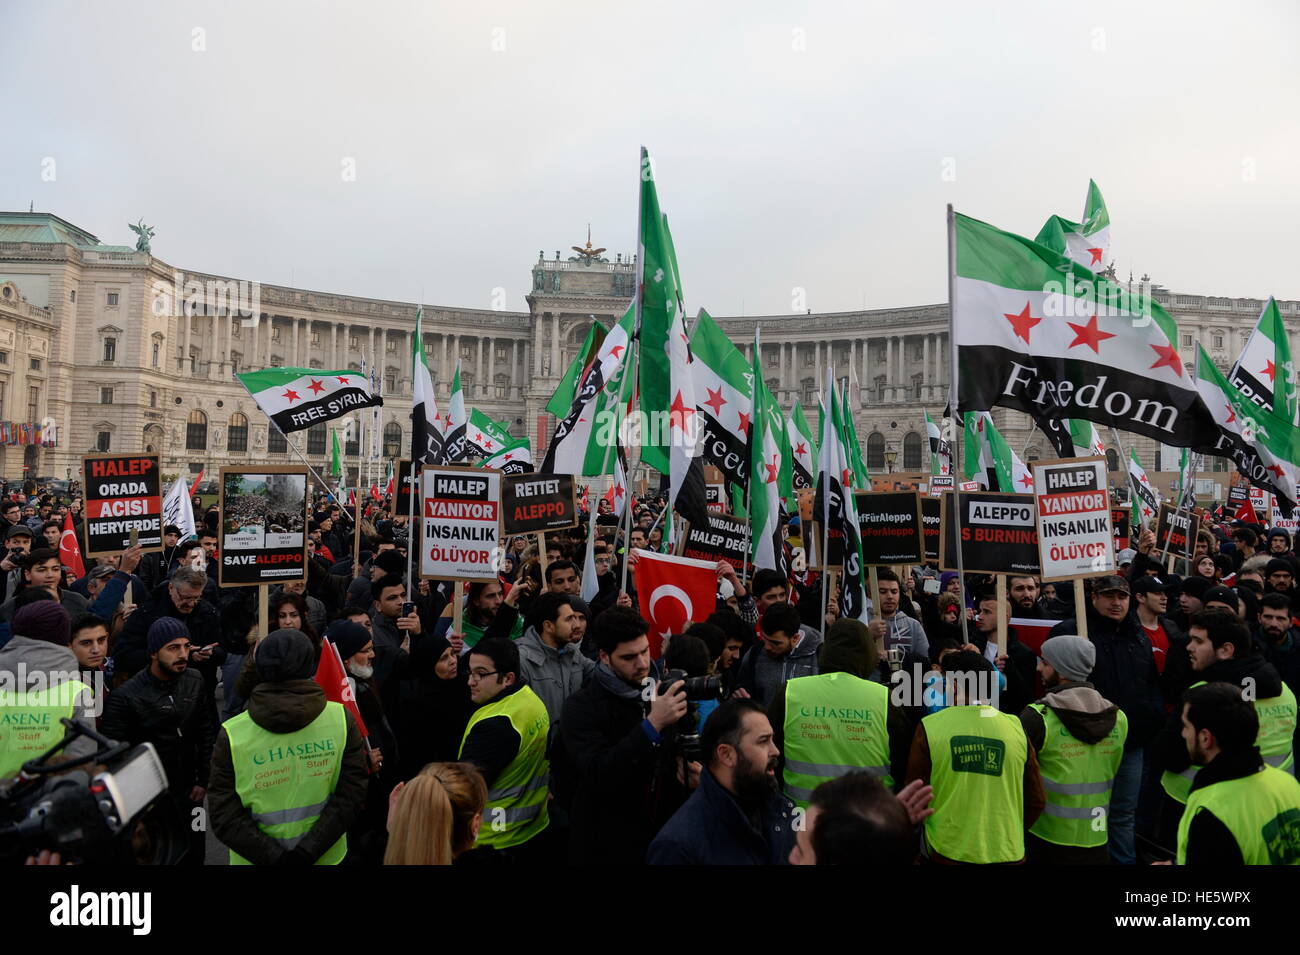 Vienna, Austria. Dec. 17th, 2016. Demonstration, stand up for Aleppo in Vienna at Heldenplatz. The Islamic Federation in Vienna called for the demonstration. 500 people have followed this call. © Franz Perc/Alamy Live News Stock Photo